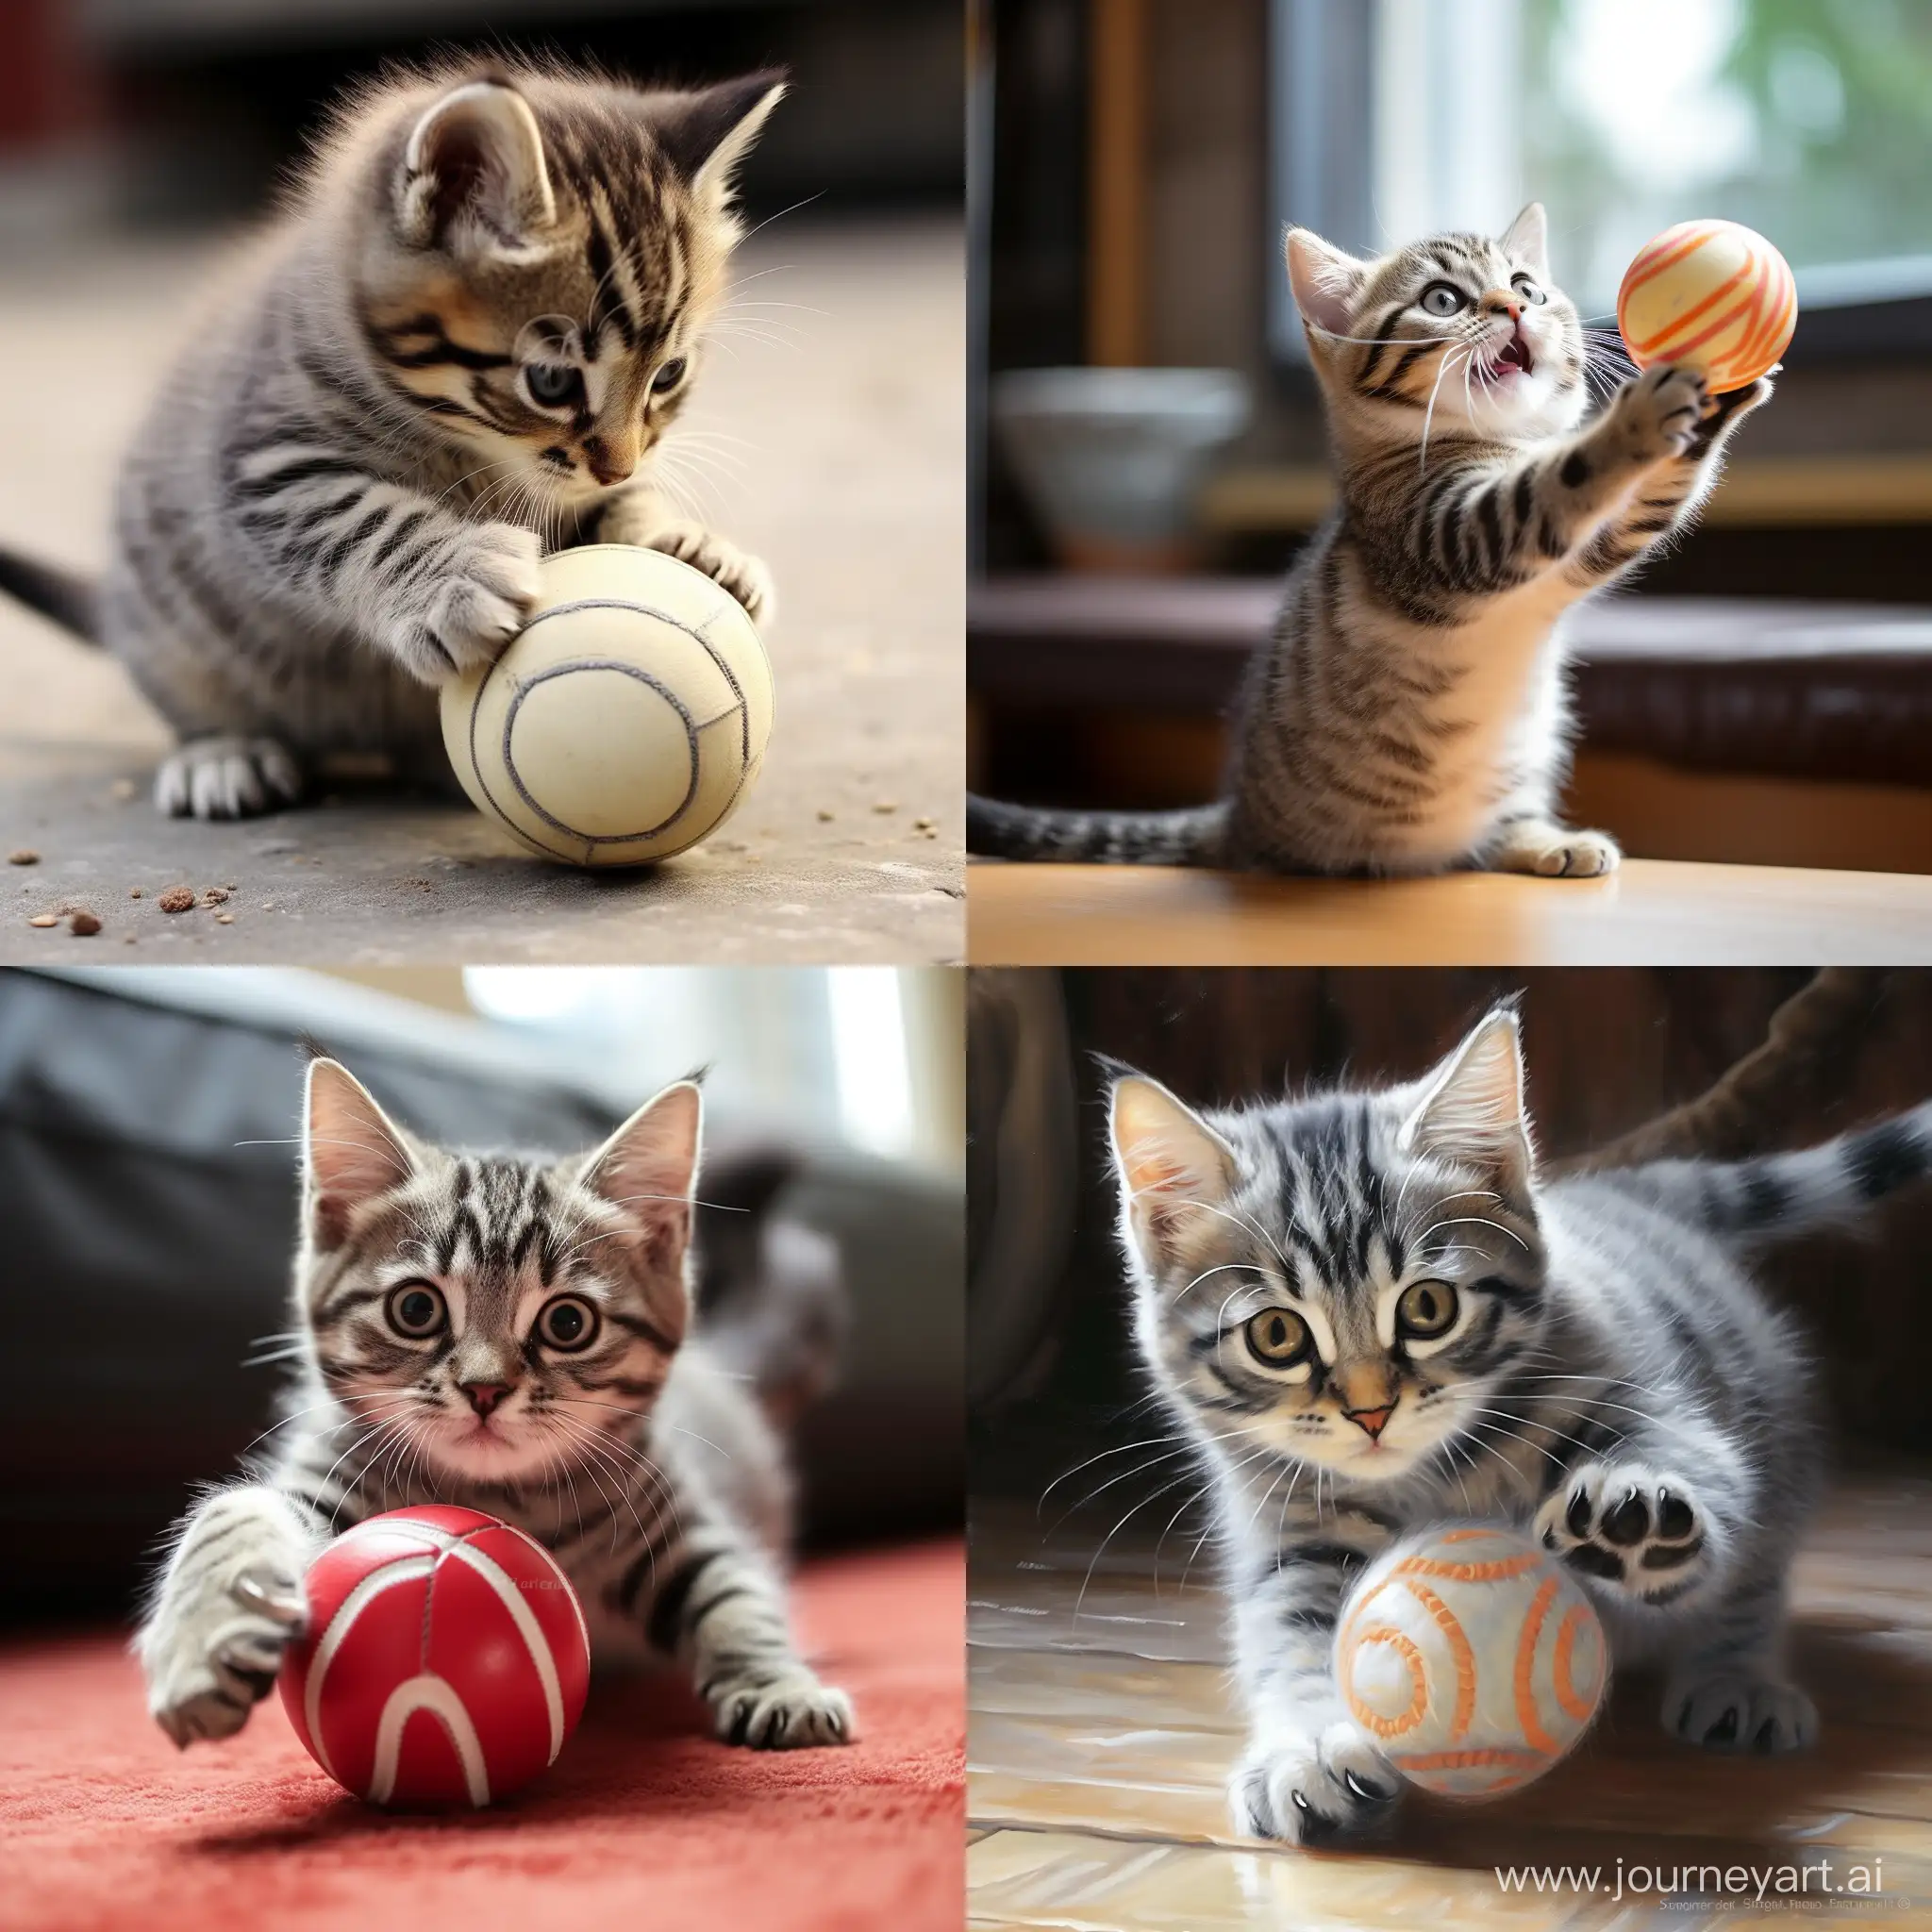 Adorable-American-Shorthair-Cat-Playfully-Engages-with-Ball